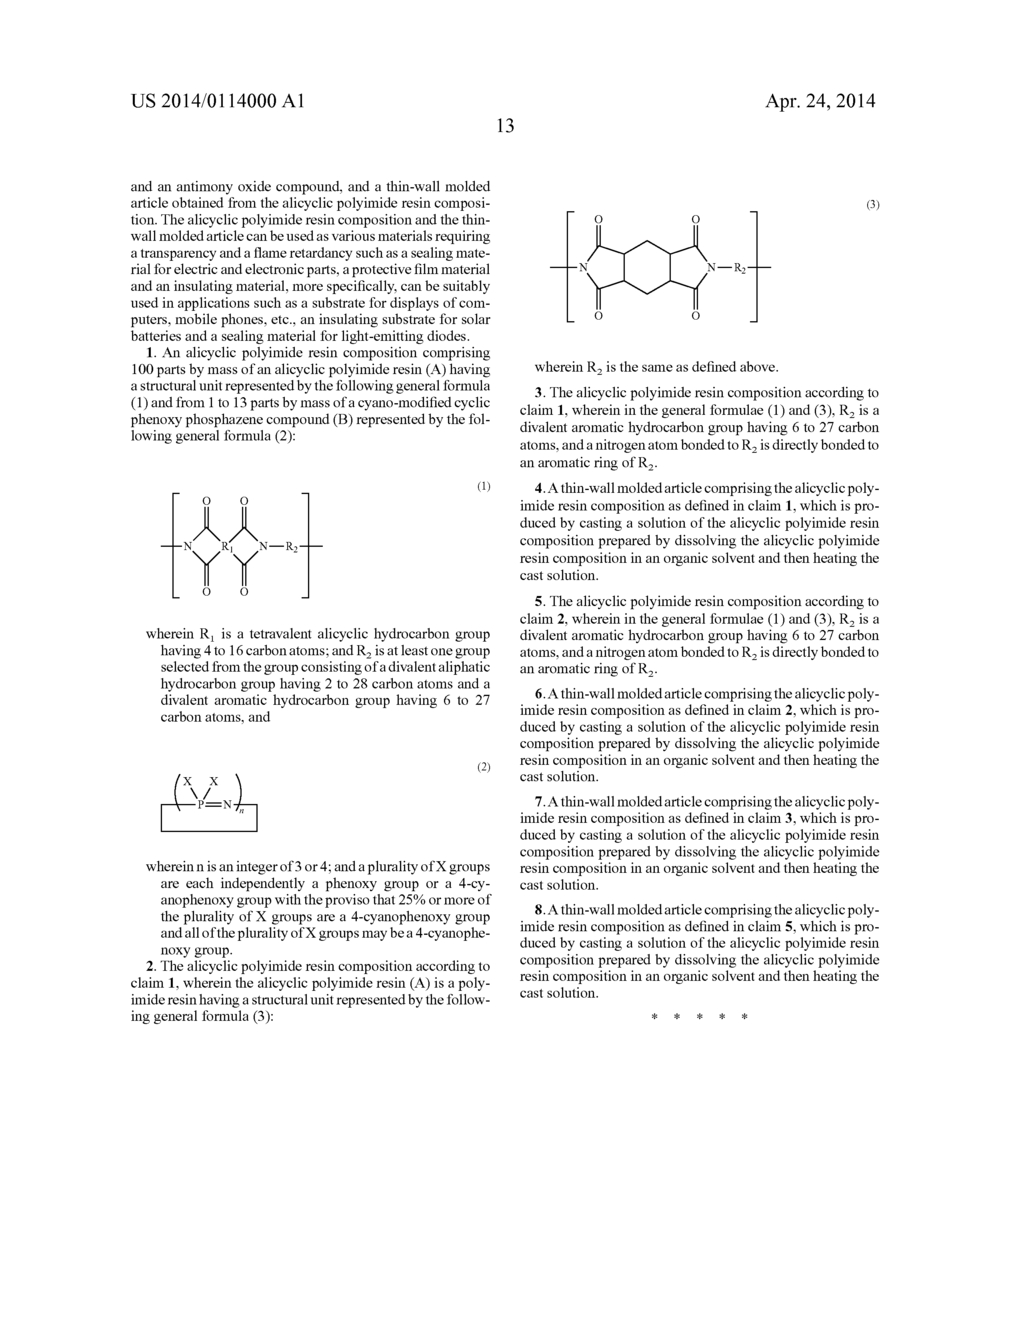 FLAMEPROOFED ALICYCLIC POLYIMIDE RESIN COMPOSITION AND THIN-WALLED MOLDED     BODY OF SAME - diagram, schematic, and image 14